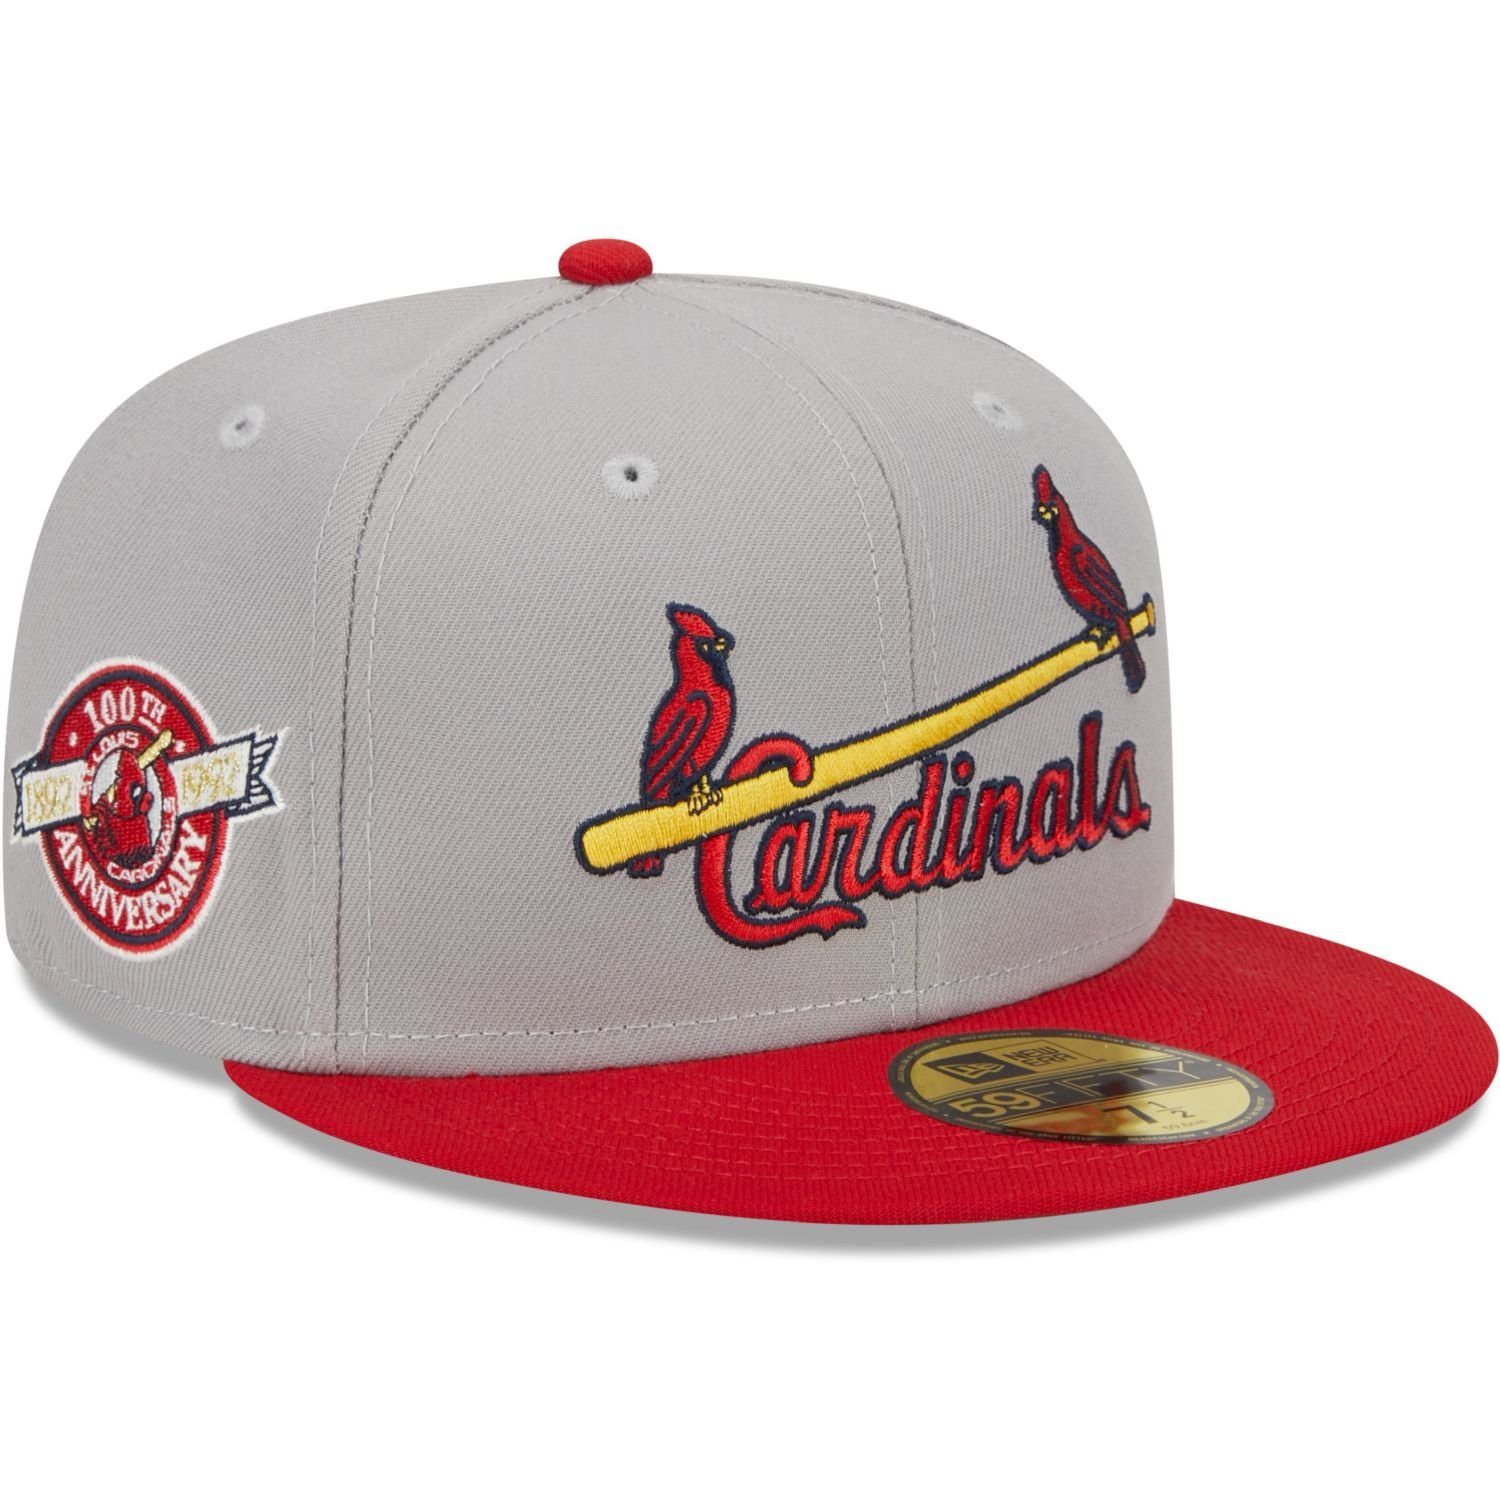 New Era Fitted Cap 59Fifty RETRO St. Louis Cardinals